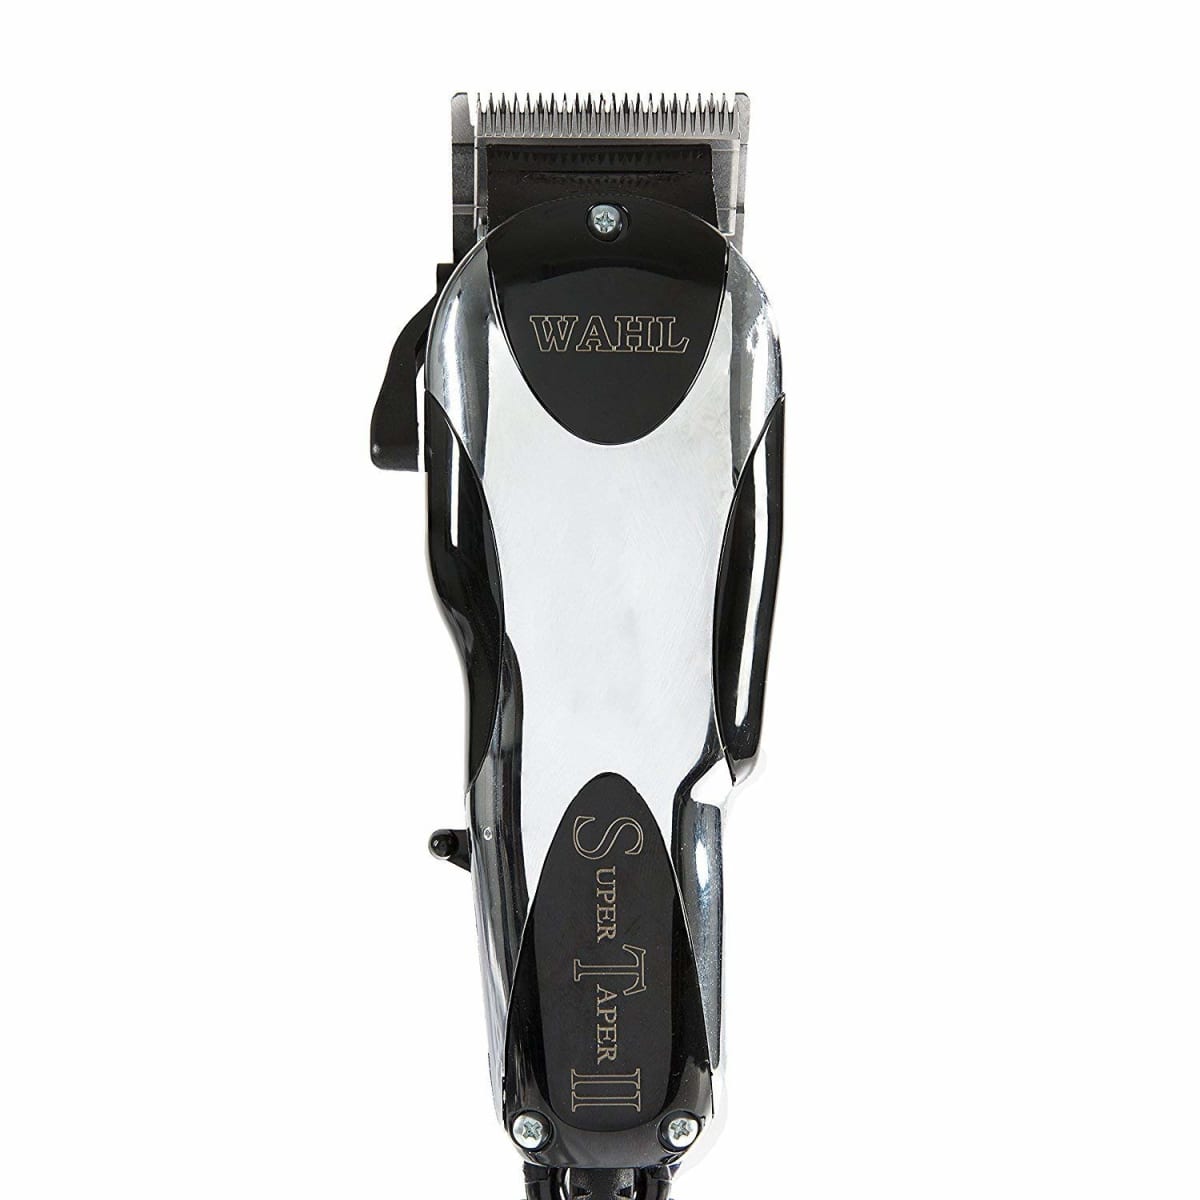 Super Taper II Hair Clipper - Full Clipper with Ultra Powerful V5000 Electromagnetic Motor and 8 Colored Guide Combs for Professional Barbers and Stylists